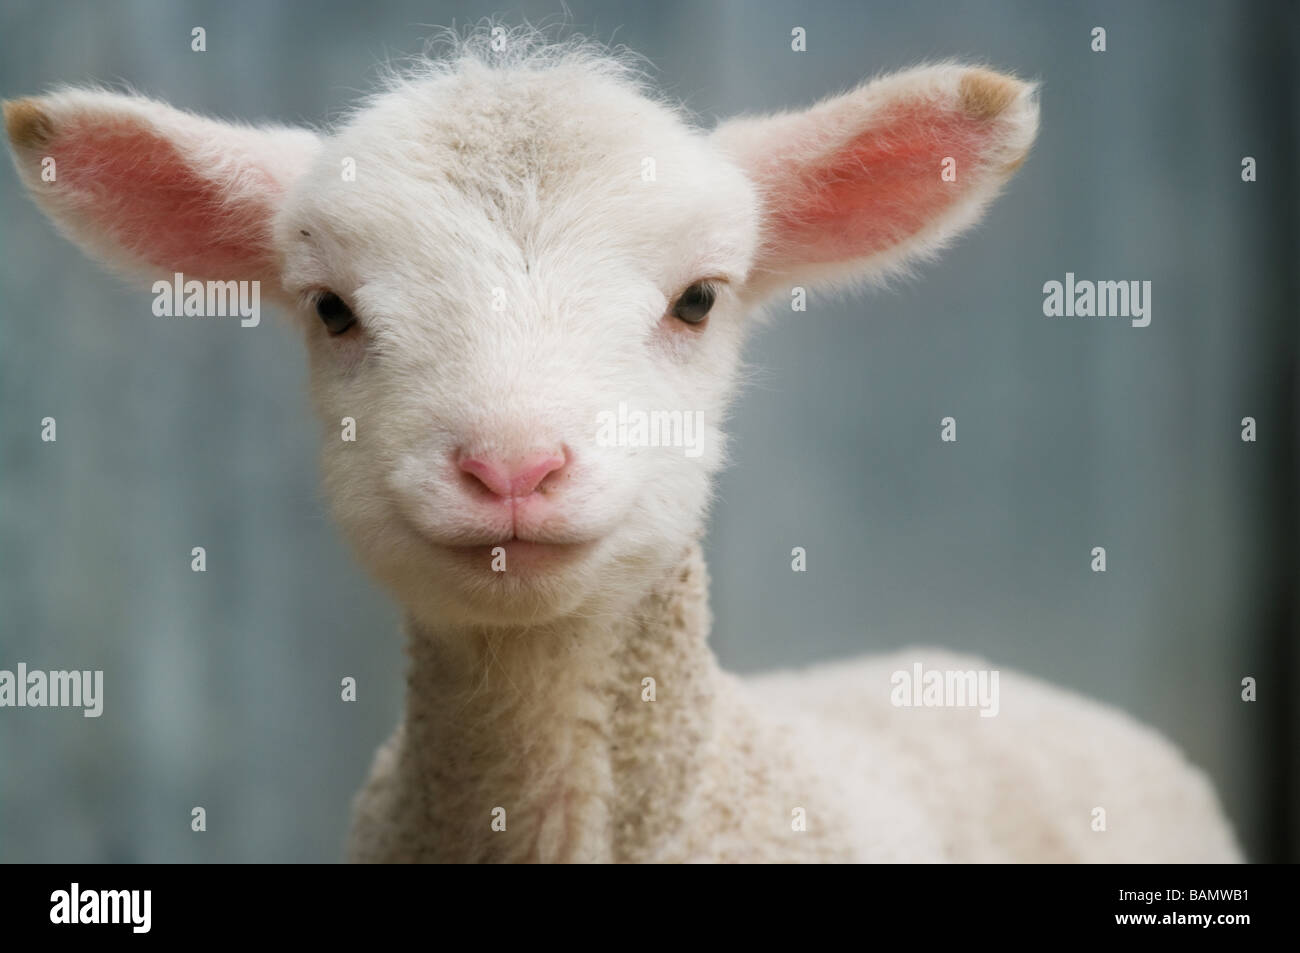 great image of a young lamb on the farm Stock Photo